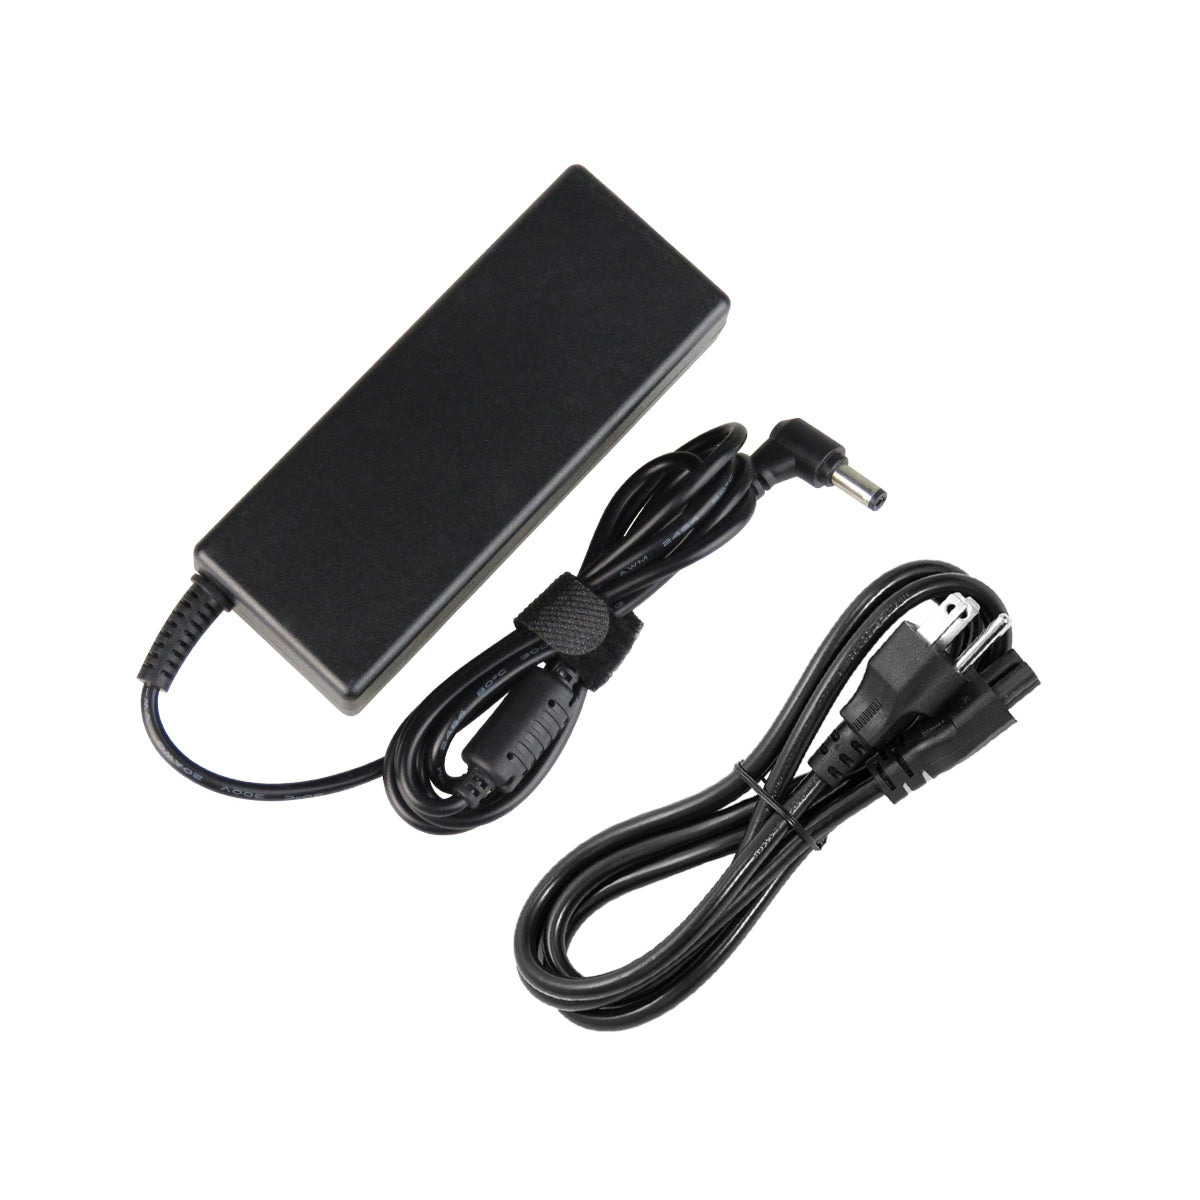 AC Adapter Charger for ASUS F55A Notebook.